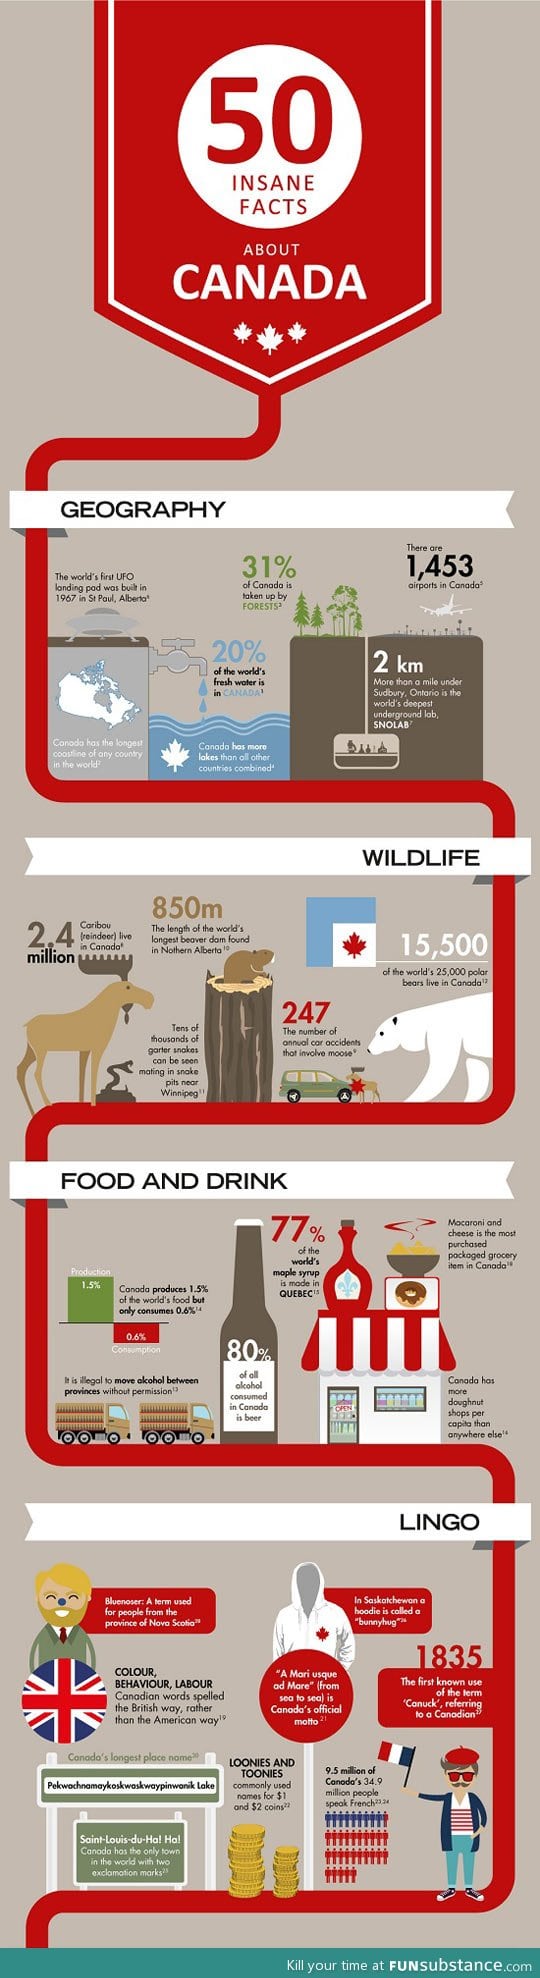 Interesting facts about canada